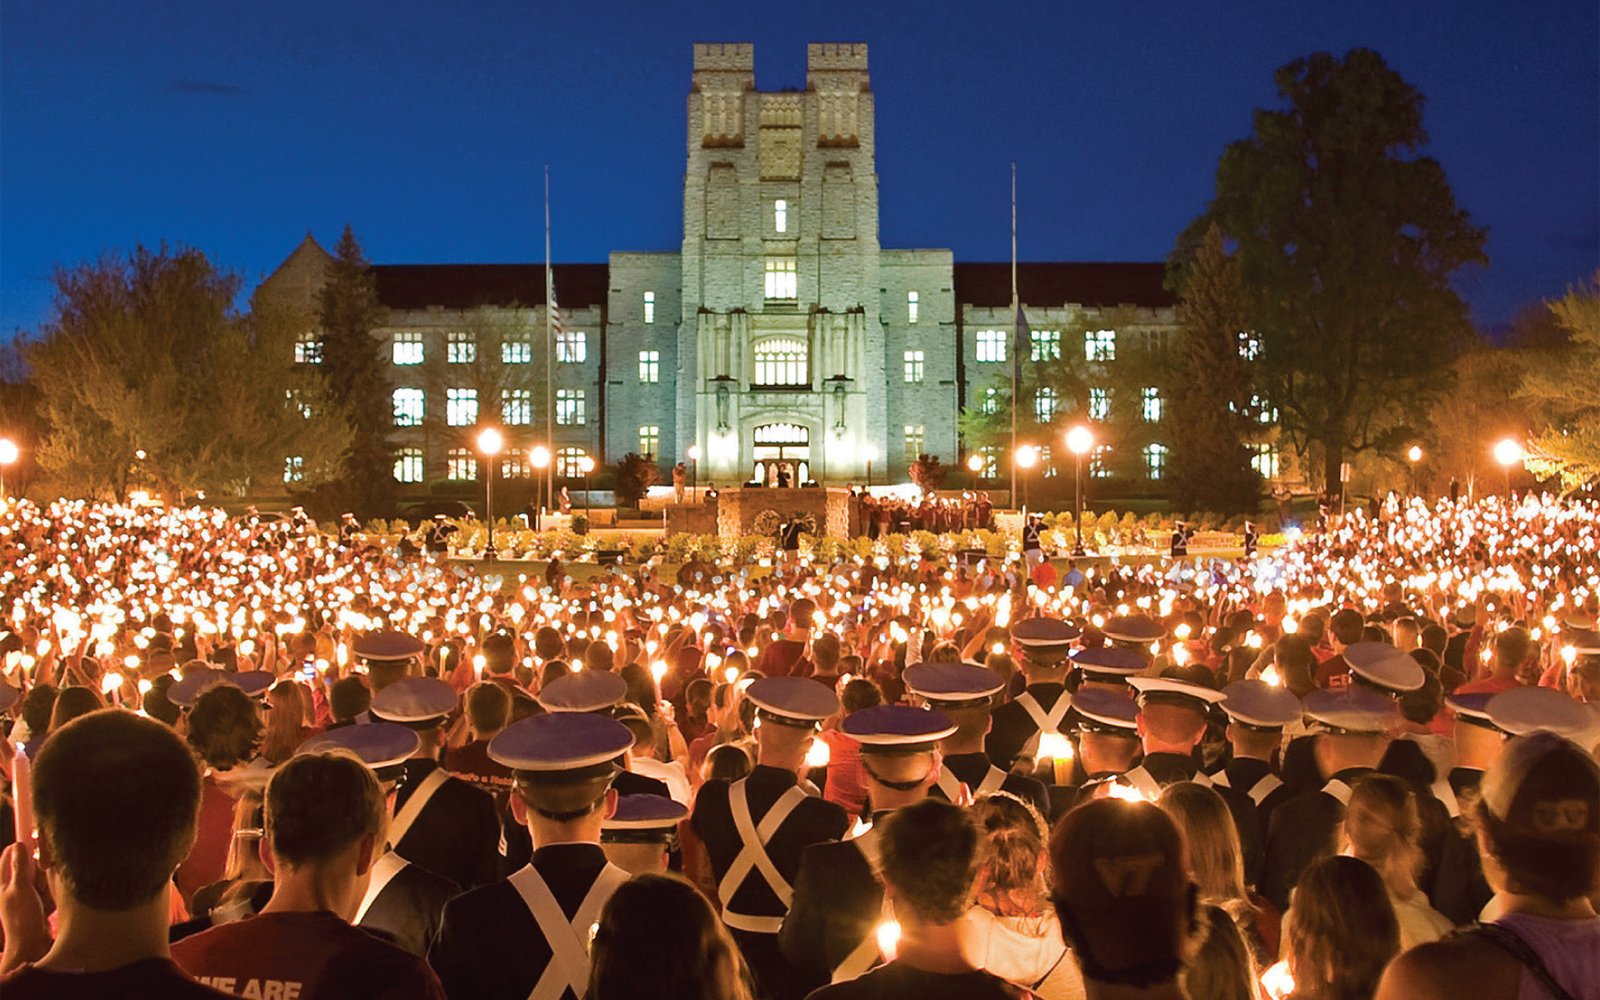 Virginia Tech prepares for 10th anniversary of deadly shootings | WTOP1600 x 1000